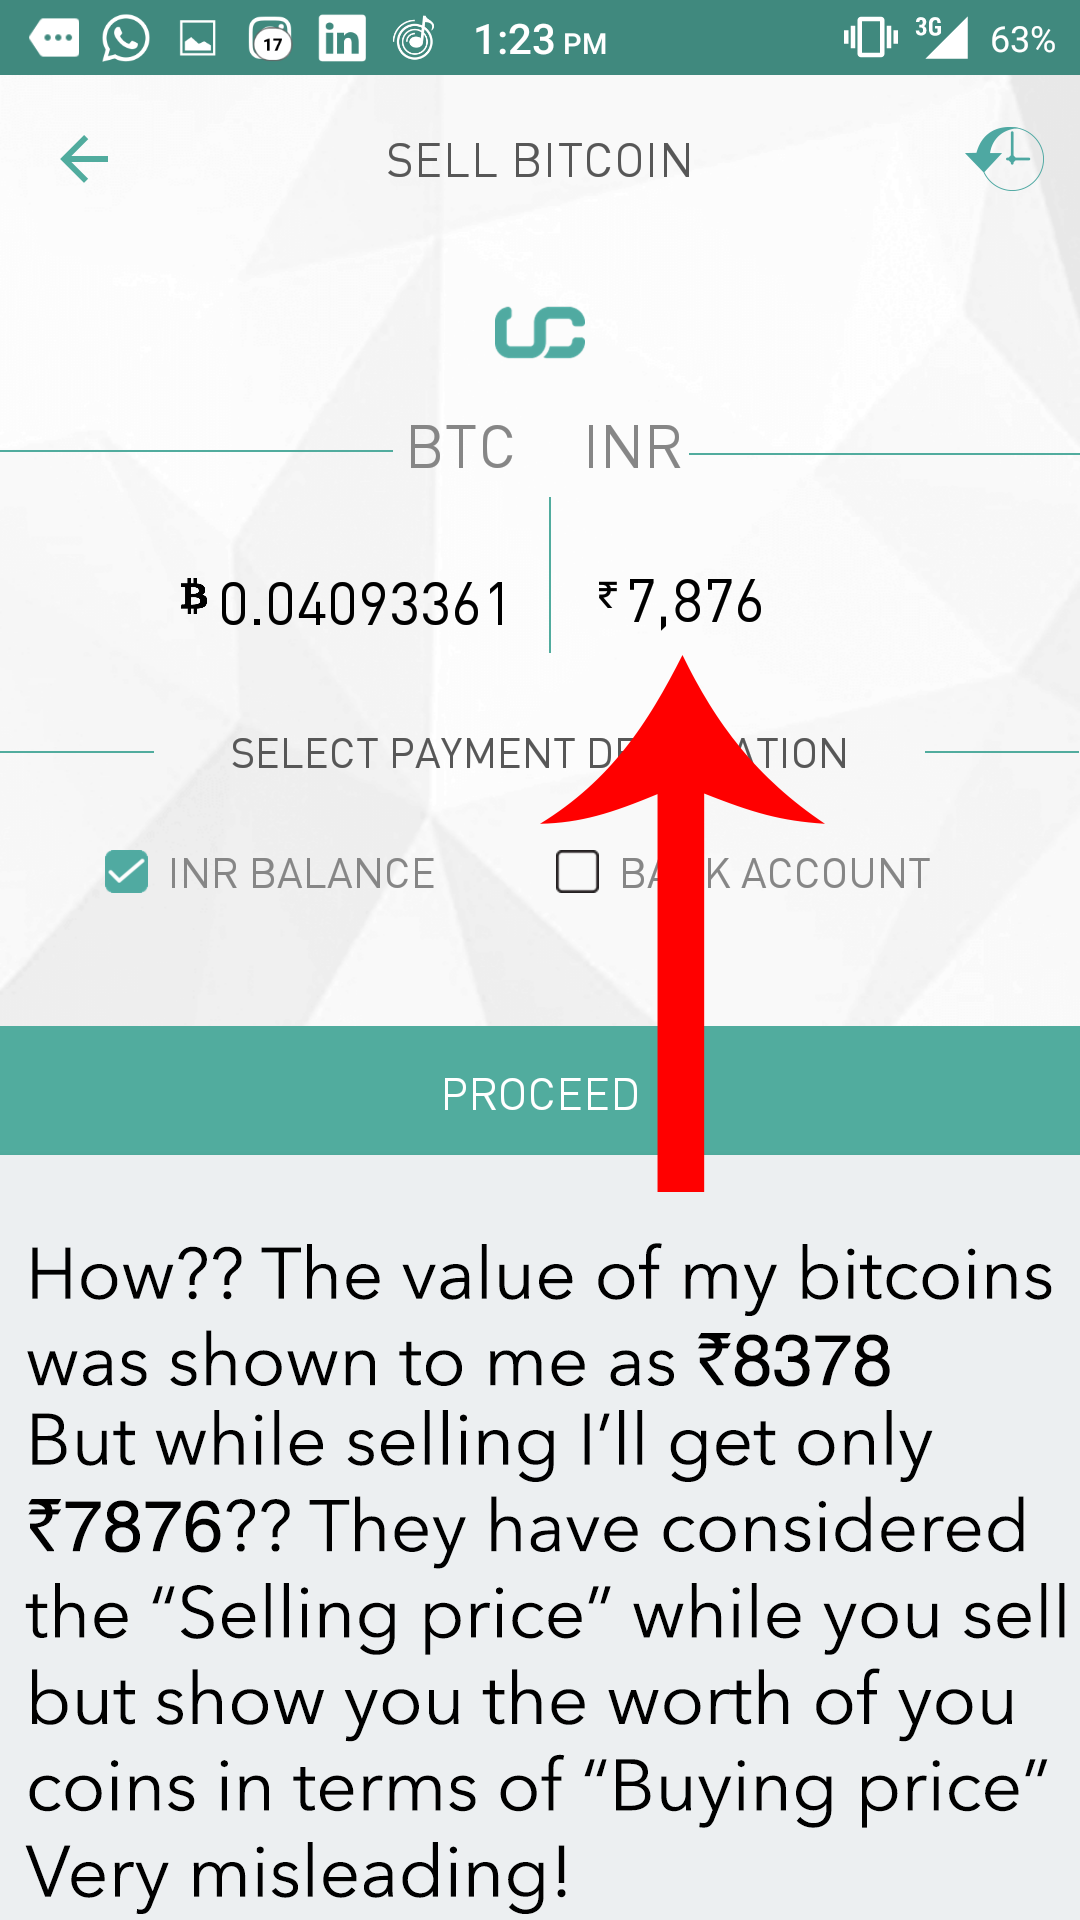 How To Purchase Bitcoins Legally In India [Tutorial]